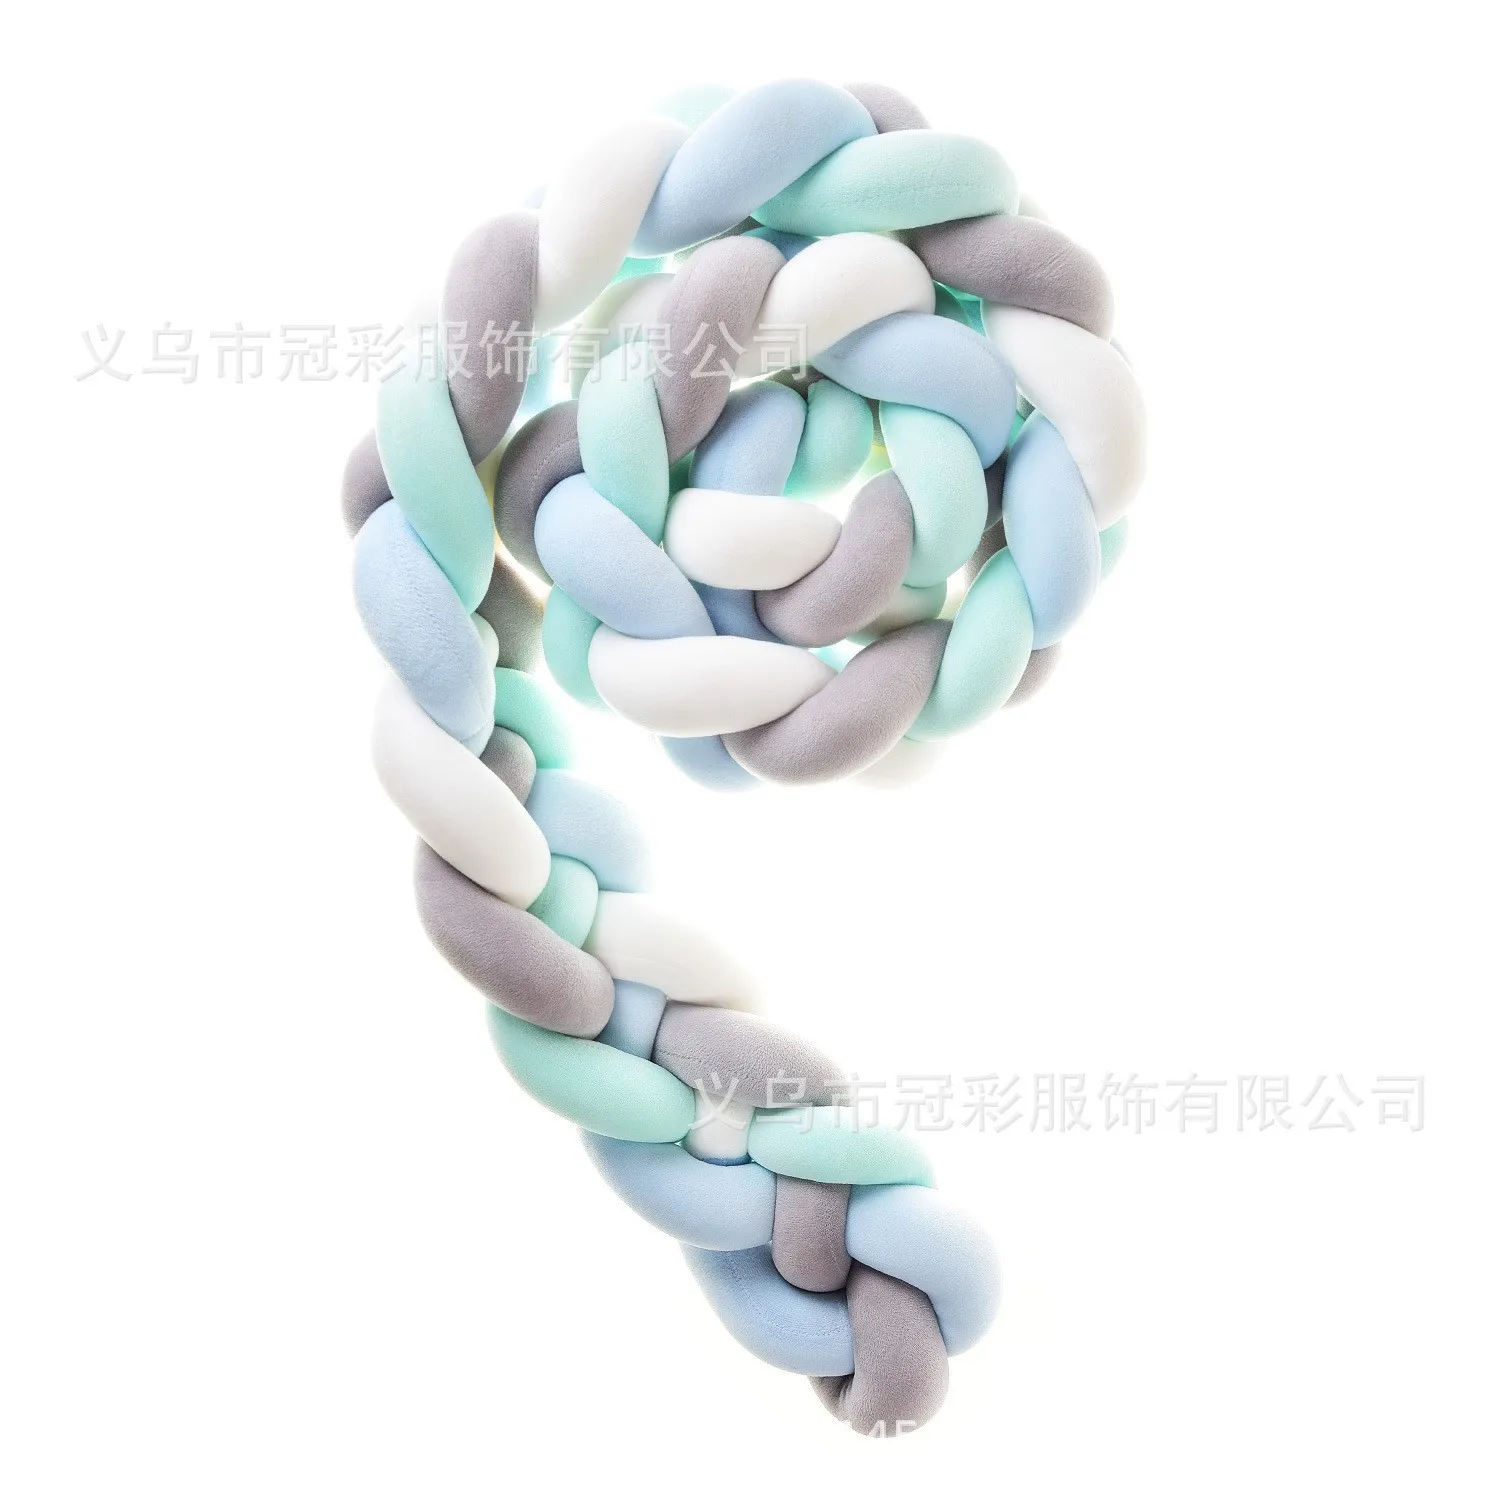 

Ins Nordic Woven Long Knotted Ball Pillow Knot Ball Twist Braid Bed Surrounding Children's Room Anti-Collision Strip Crib Bumper